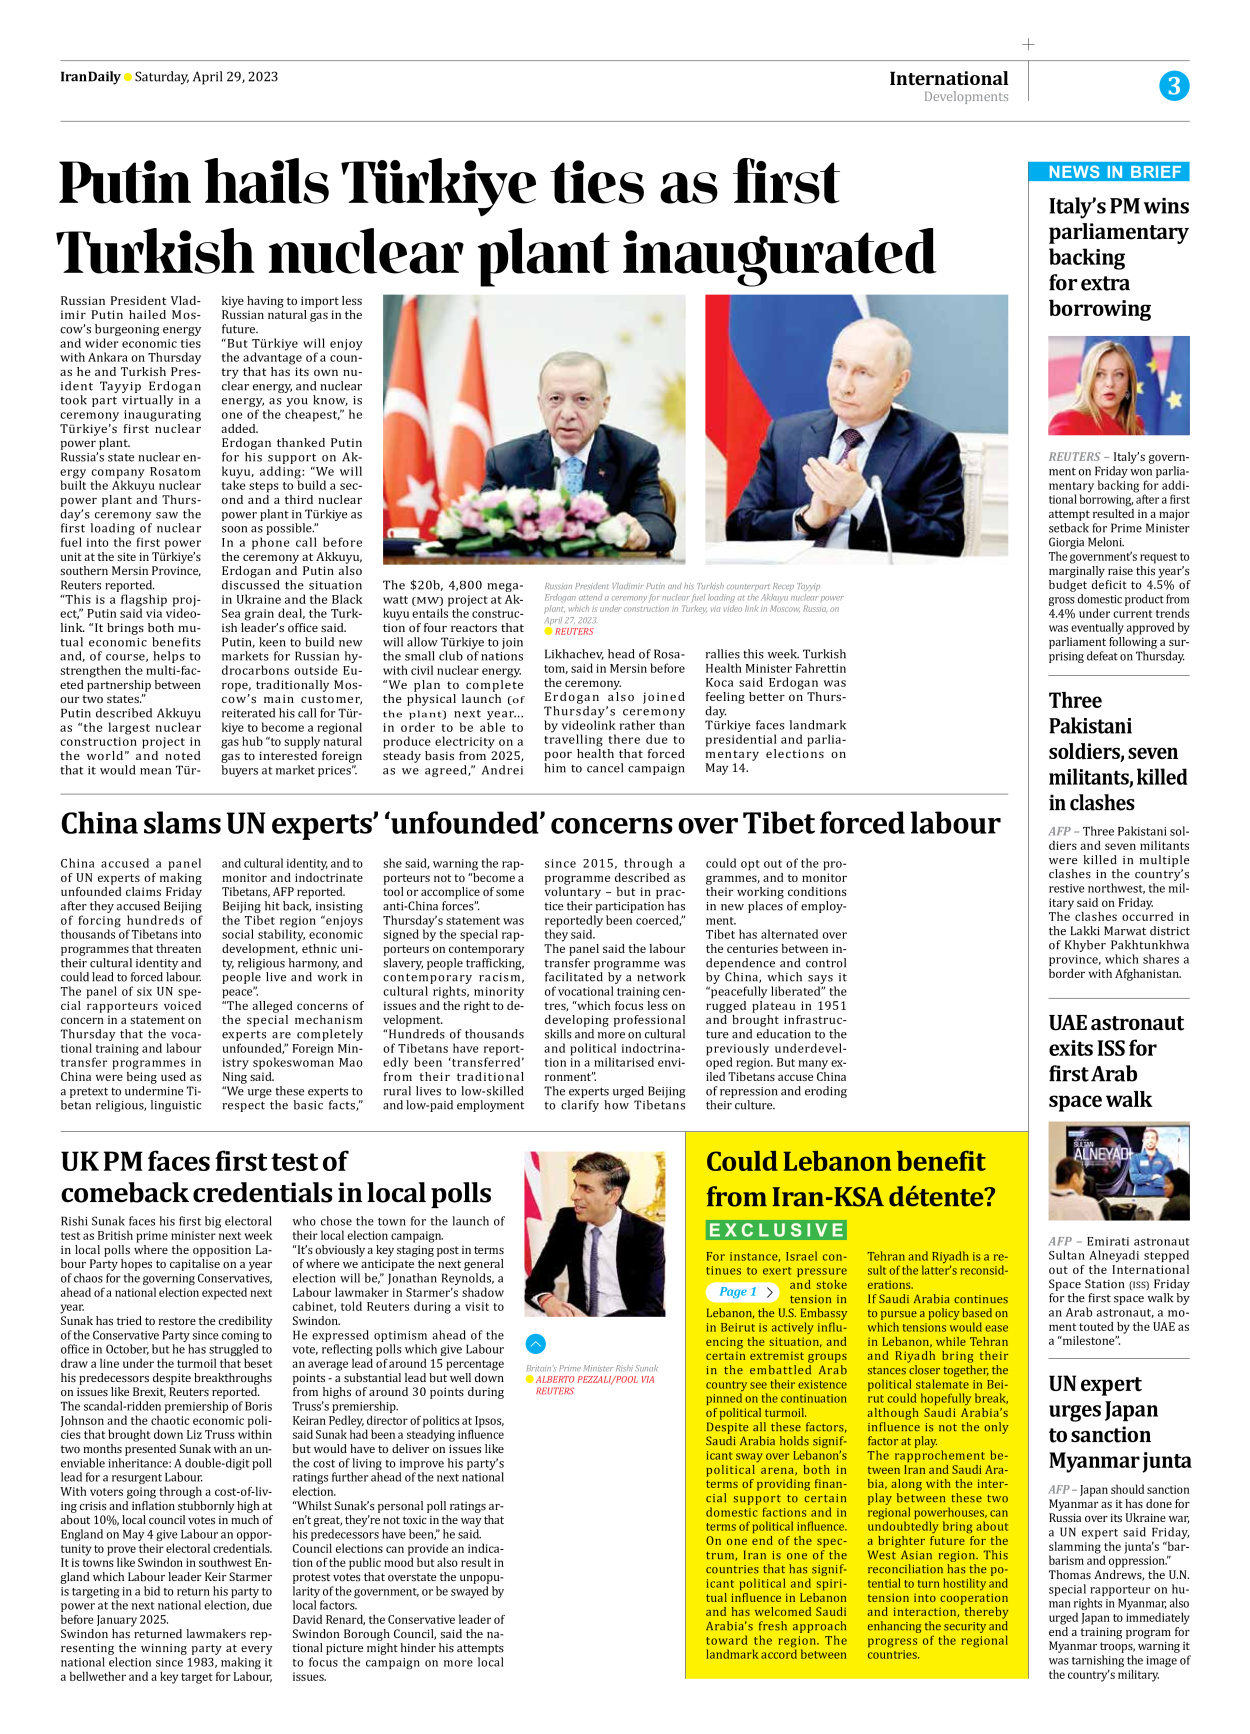 Iran Daily - Number Seven Thousand Two Hundred and Seventy Eight - 29 April 2023 - Page 3